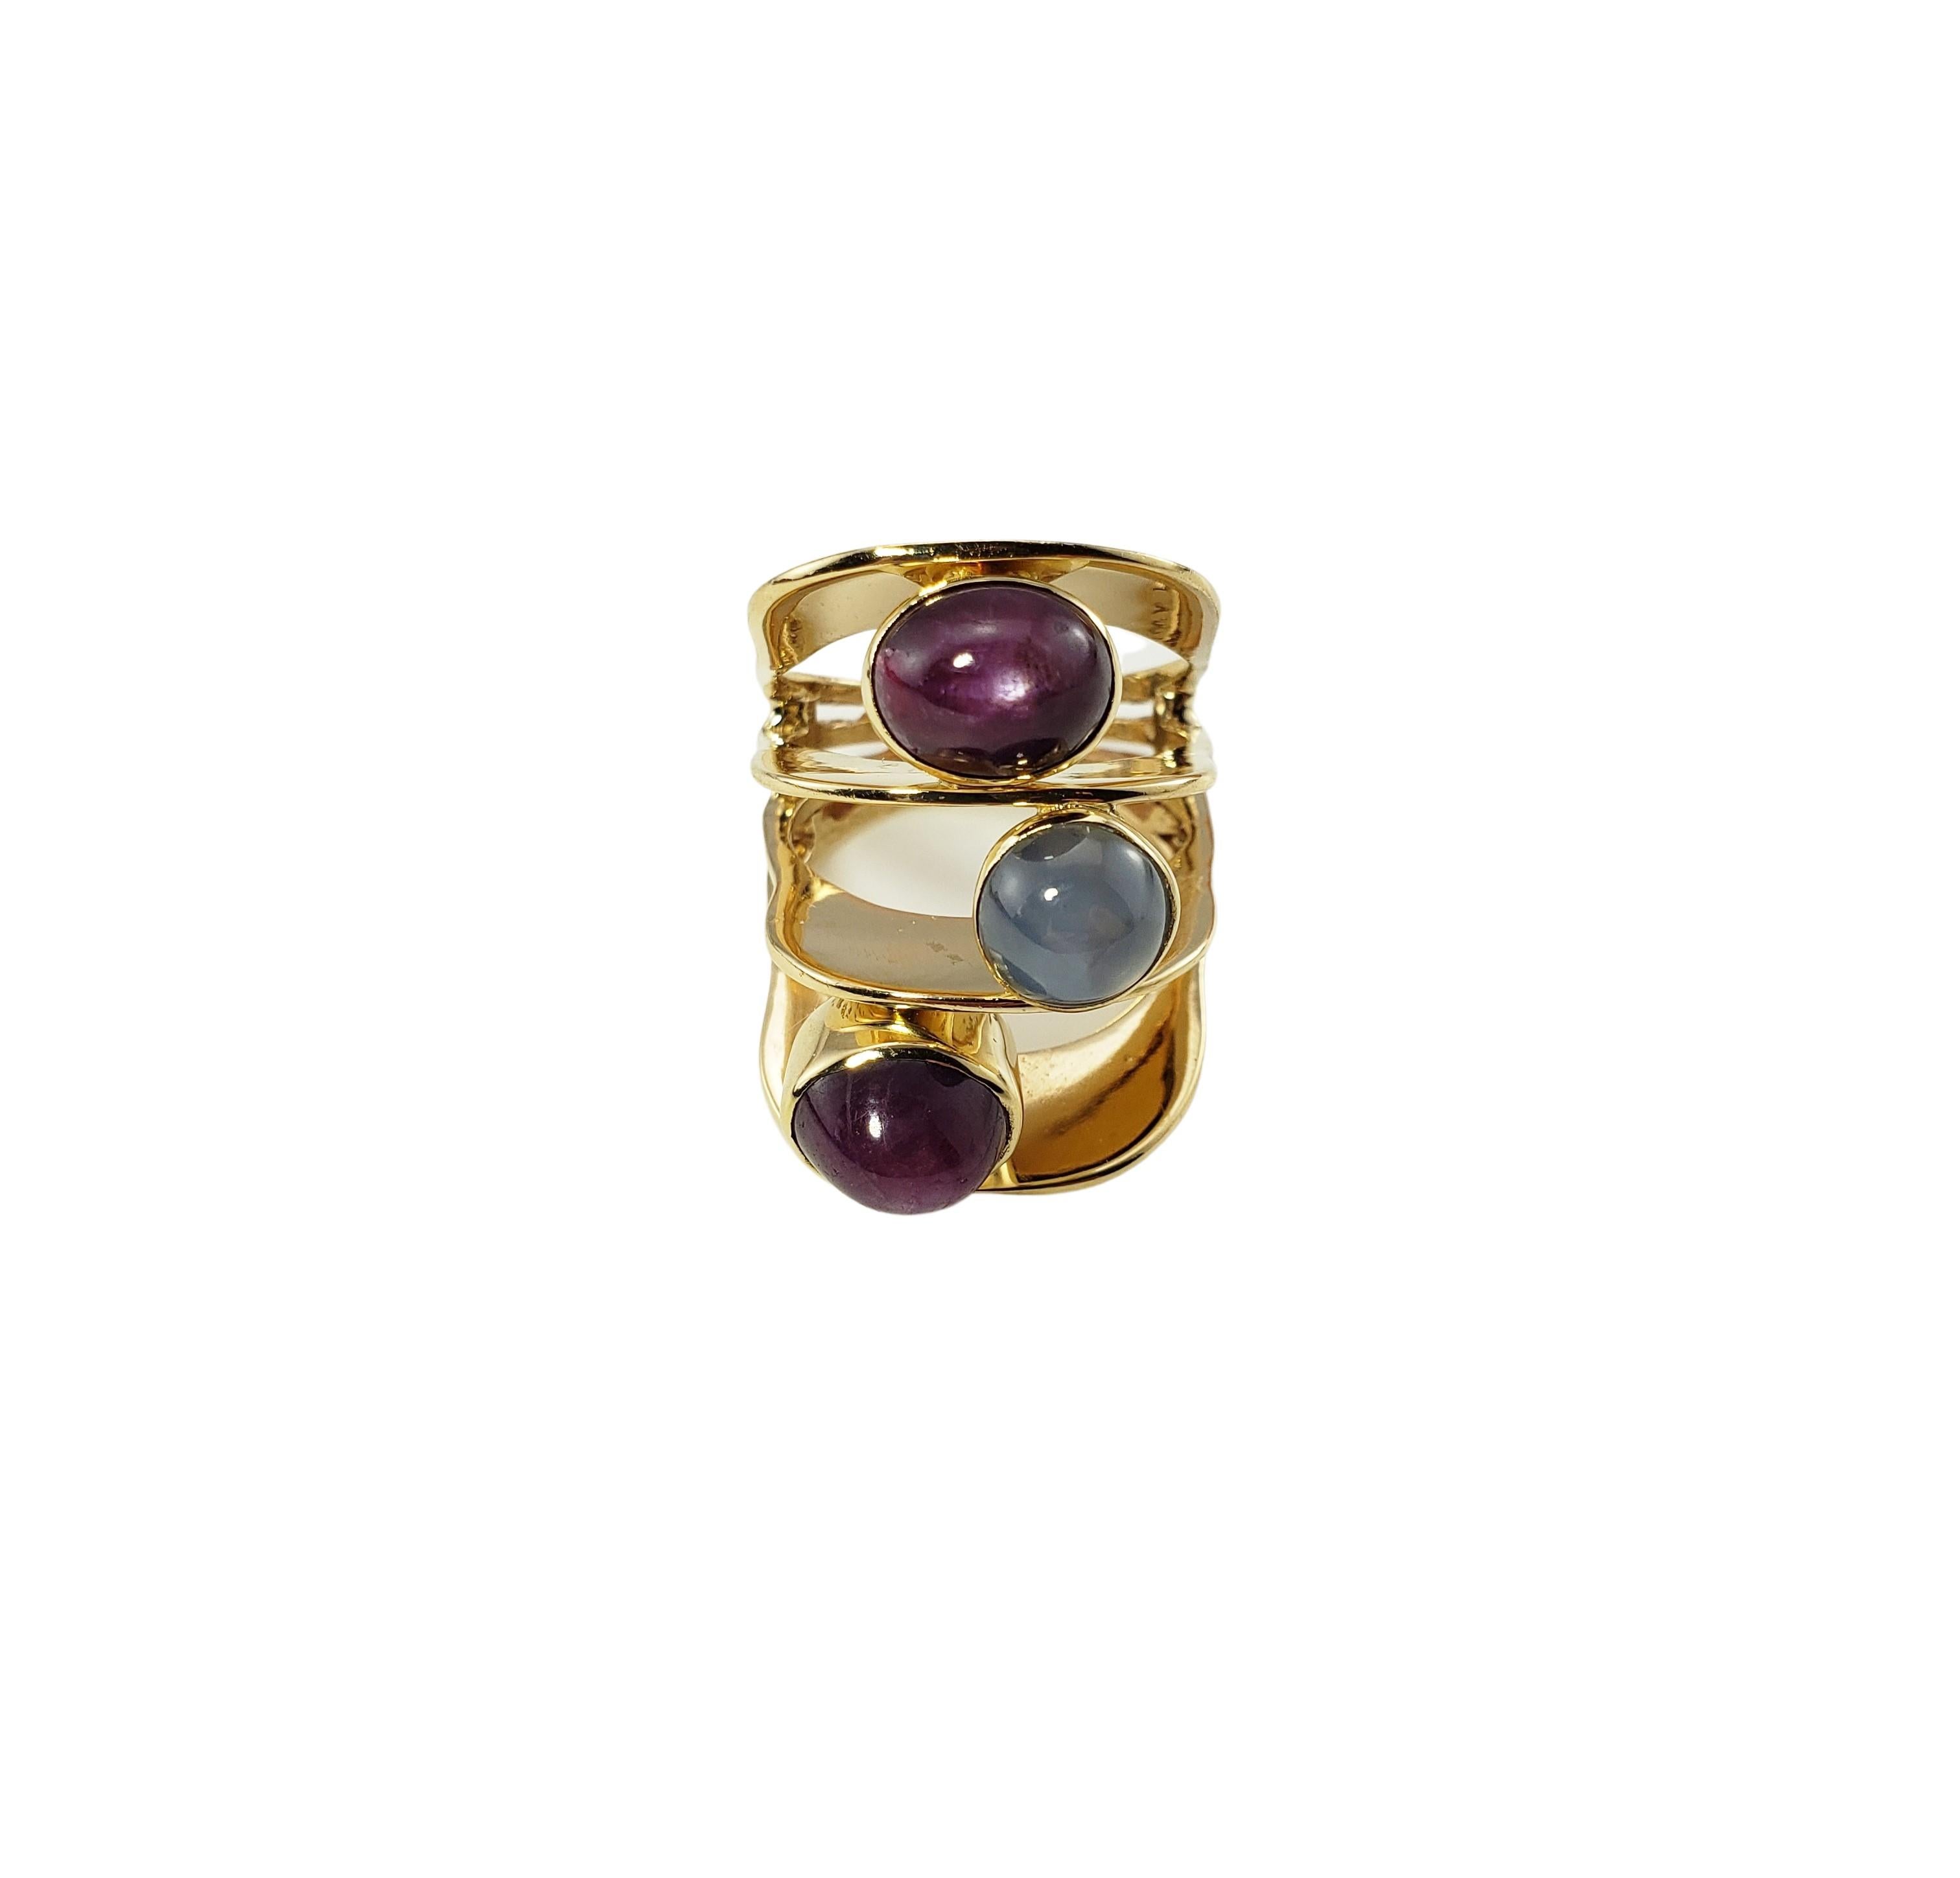 14 Karat Yellow Gold and Star Sapphire Ring Size 10.25 GAI Certified-

This stunning ring features three oval cabochon star sapphires (one blue, two purple 10 mm x 8 mm each) set in beautifully detailed 14K yellow gold.  Width:  29 mm.  Shank:  7